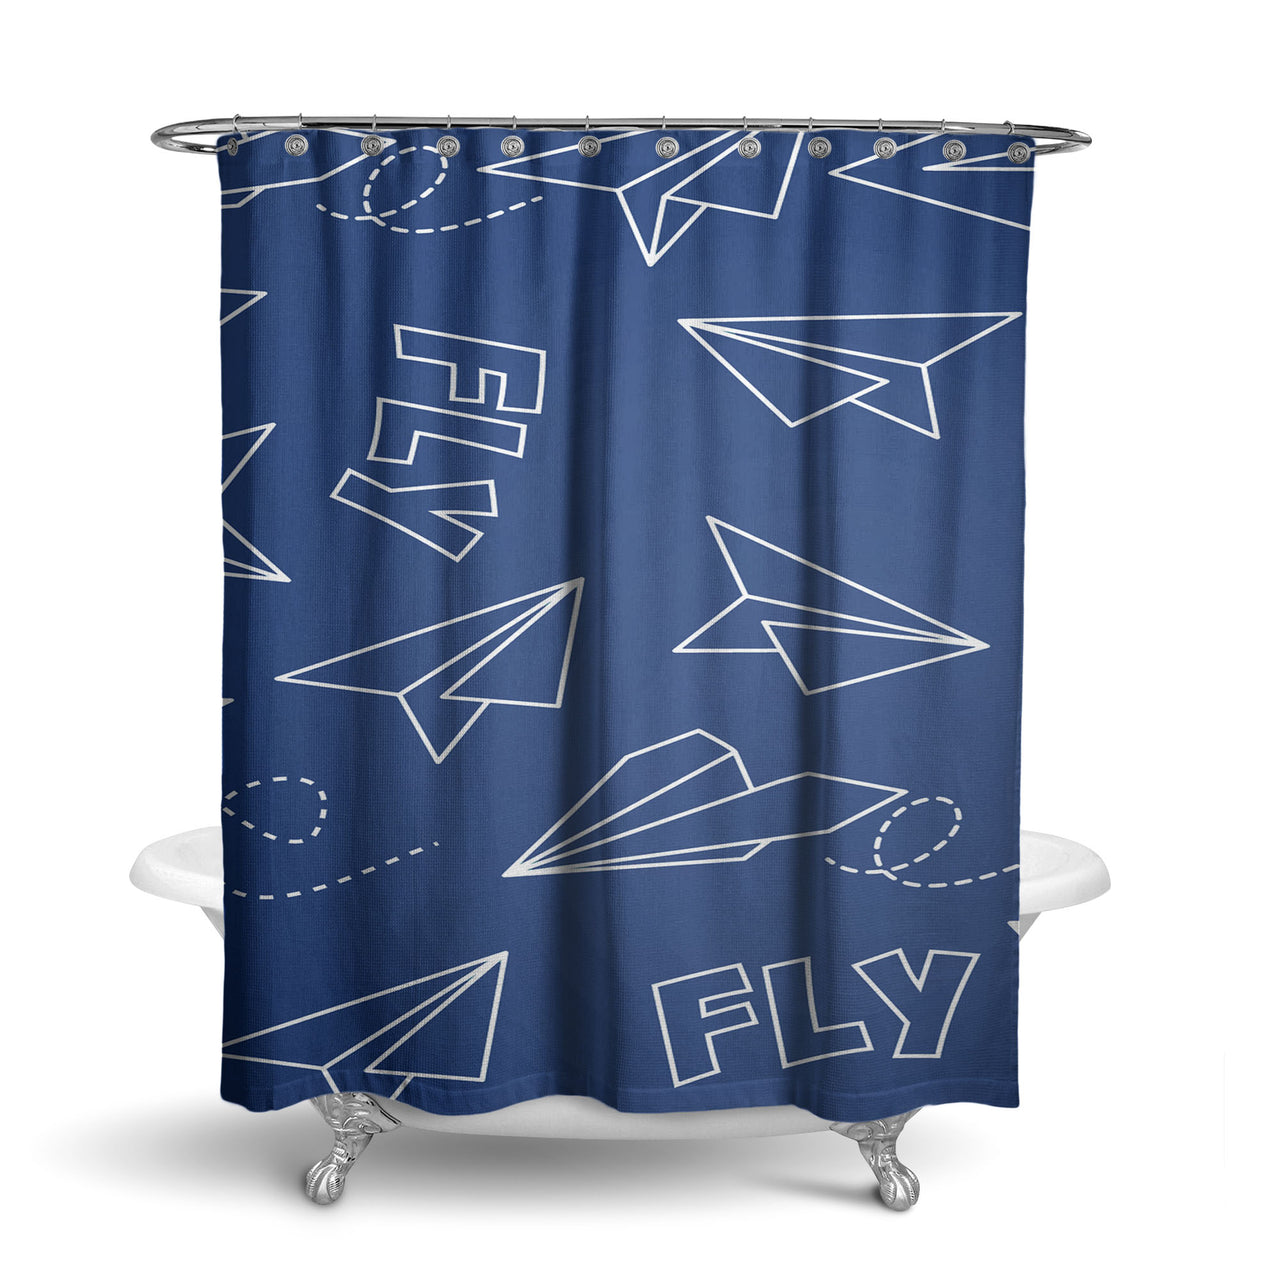 Paper Airplane & Fly-Blue Designed Shower Curtains